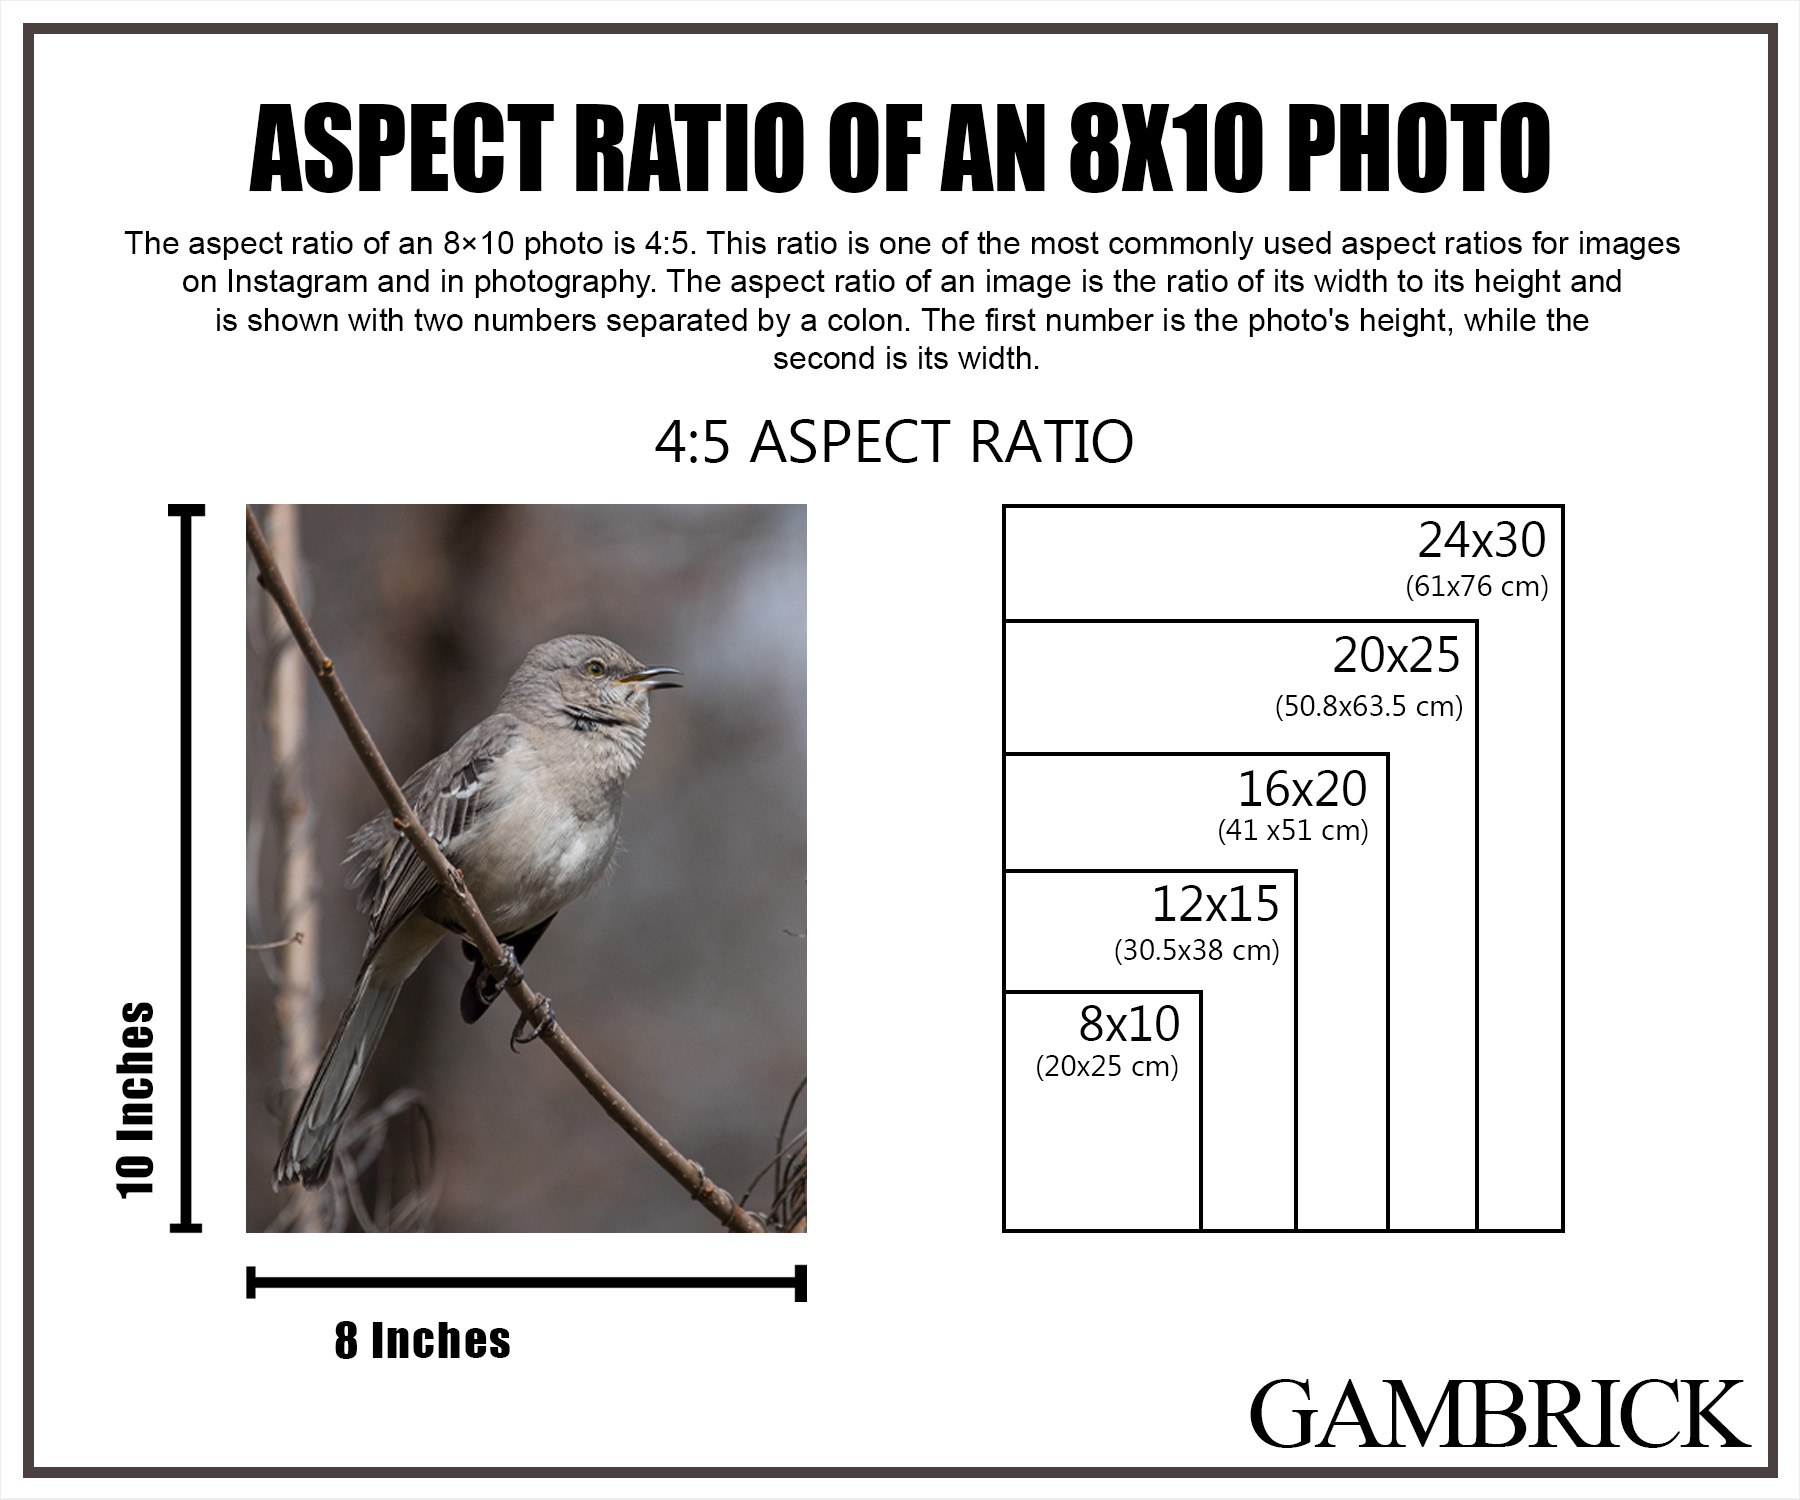 Aspect ratio of an 8x10 photo infographic chart 1.0